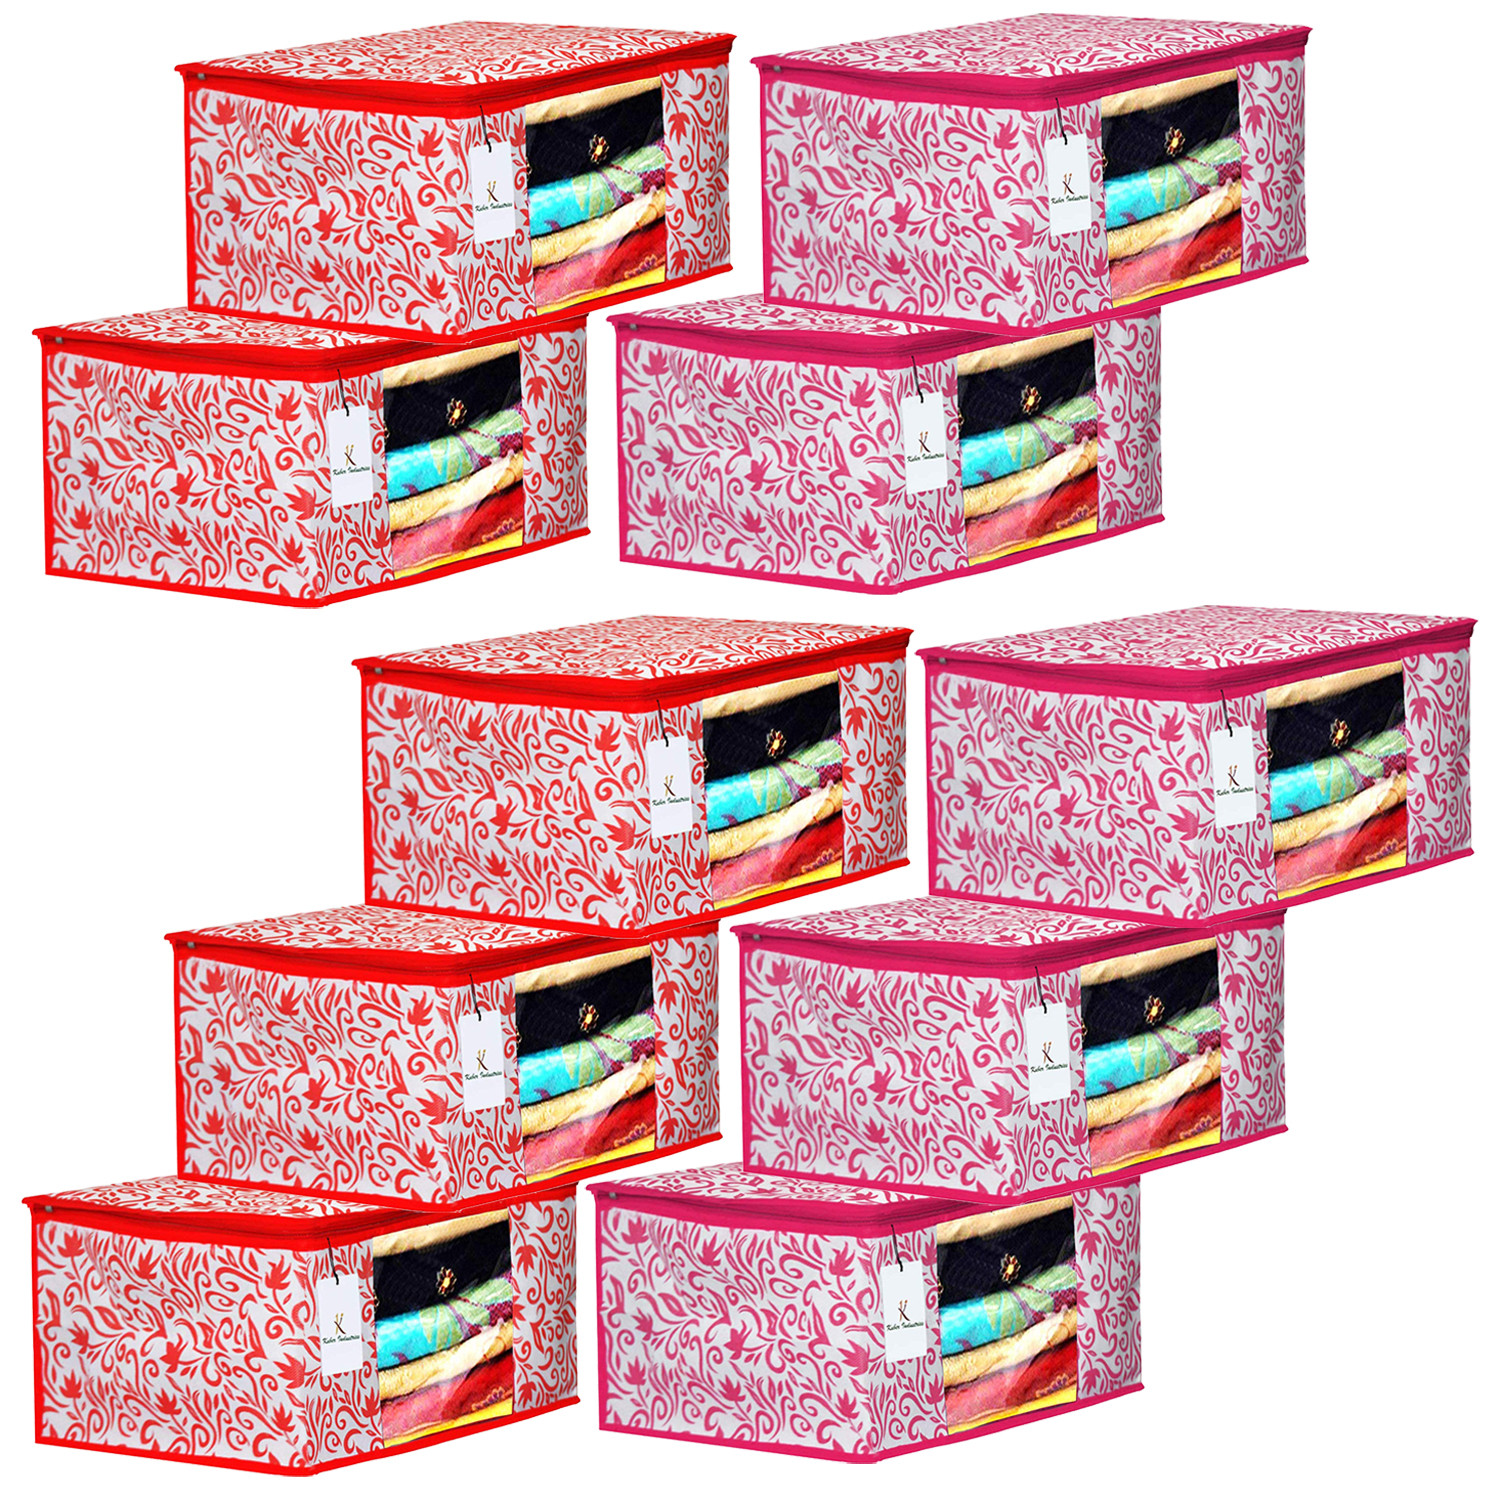 Kuber Industries Leaf Design Non Woven Fabric Saree Cover Set with Transparent Window, Extra Large, Red & Pink -CTKTC40765